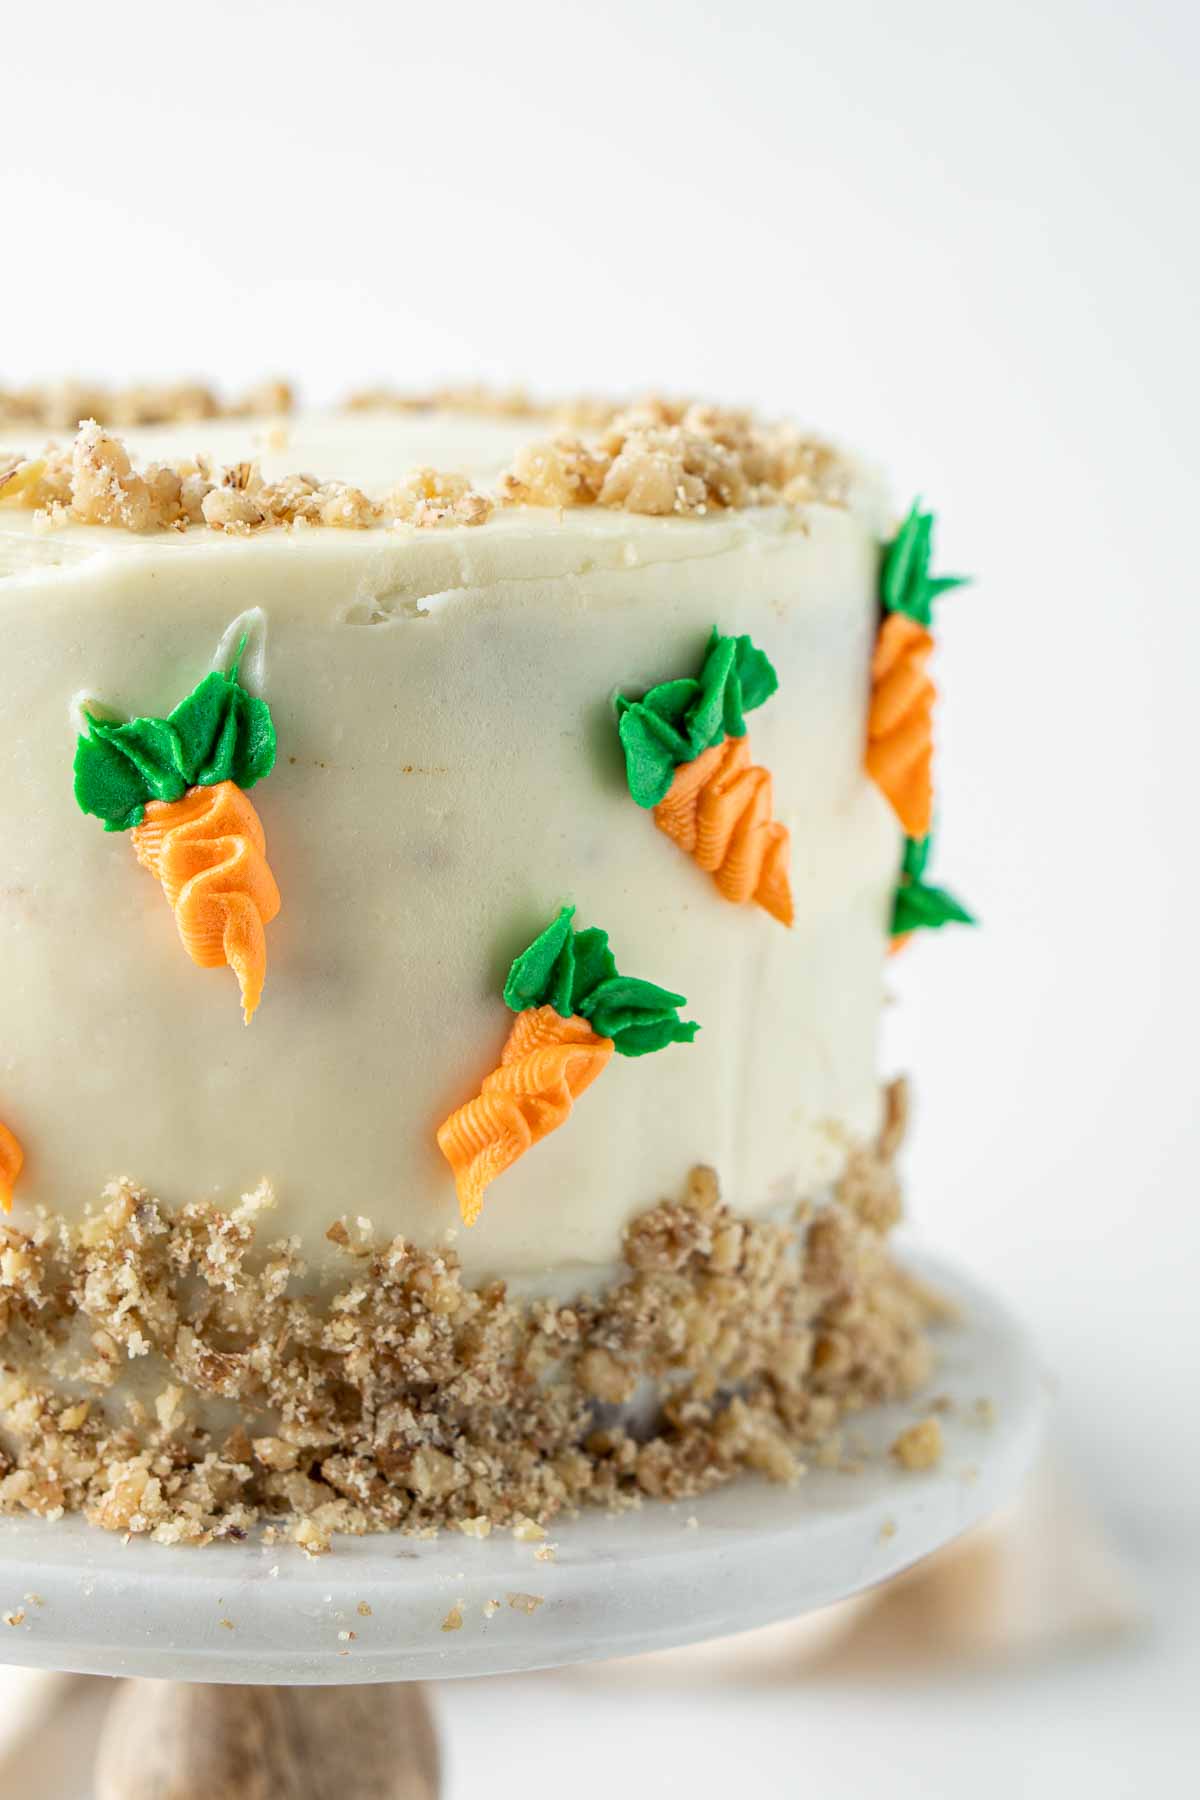 Close up of cute piped buttercream carrots on the cake.